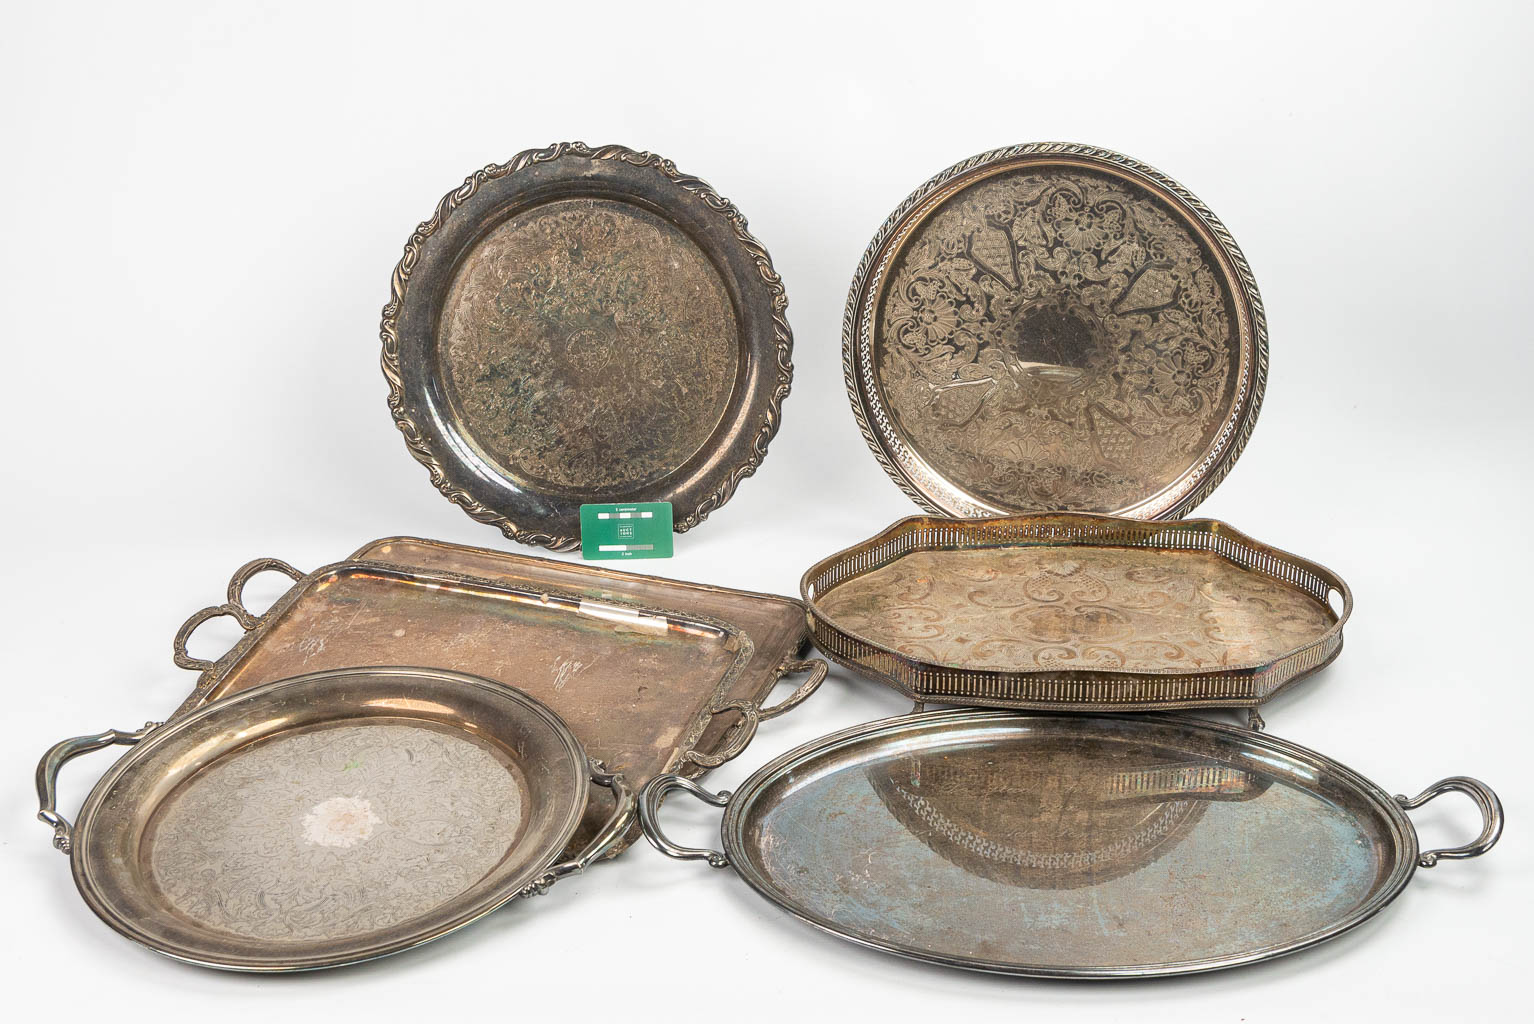 A very large collection of silver-plated items